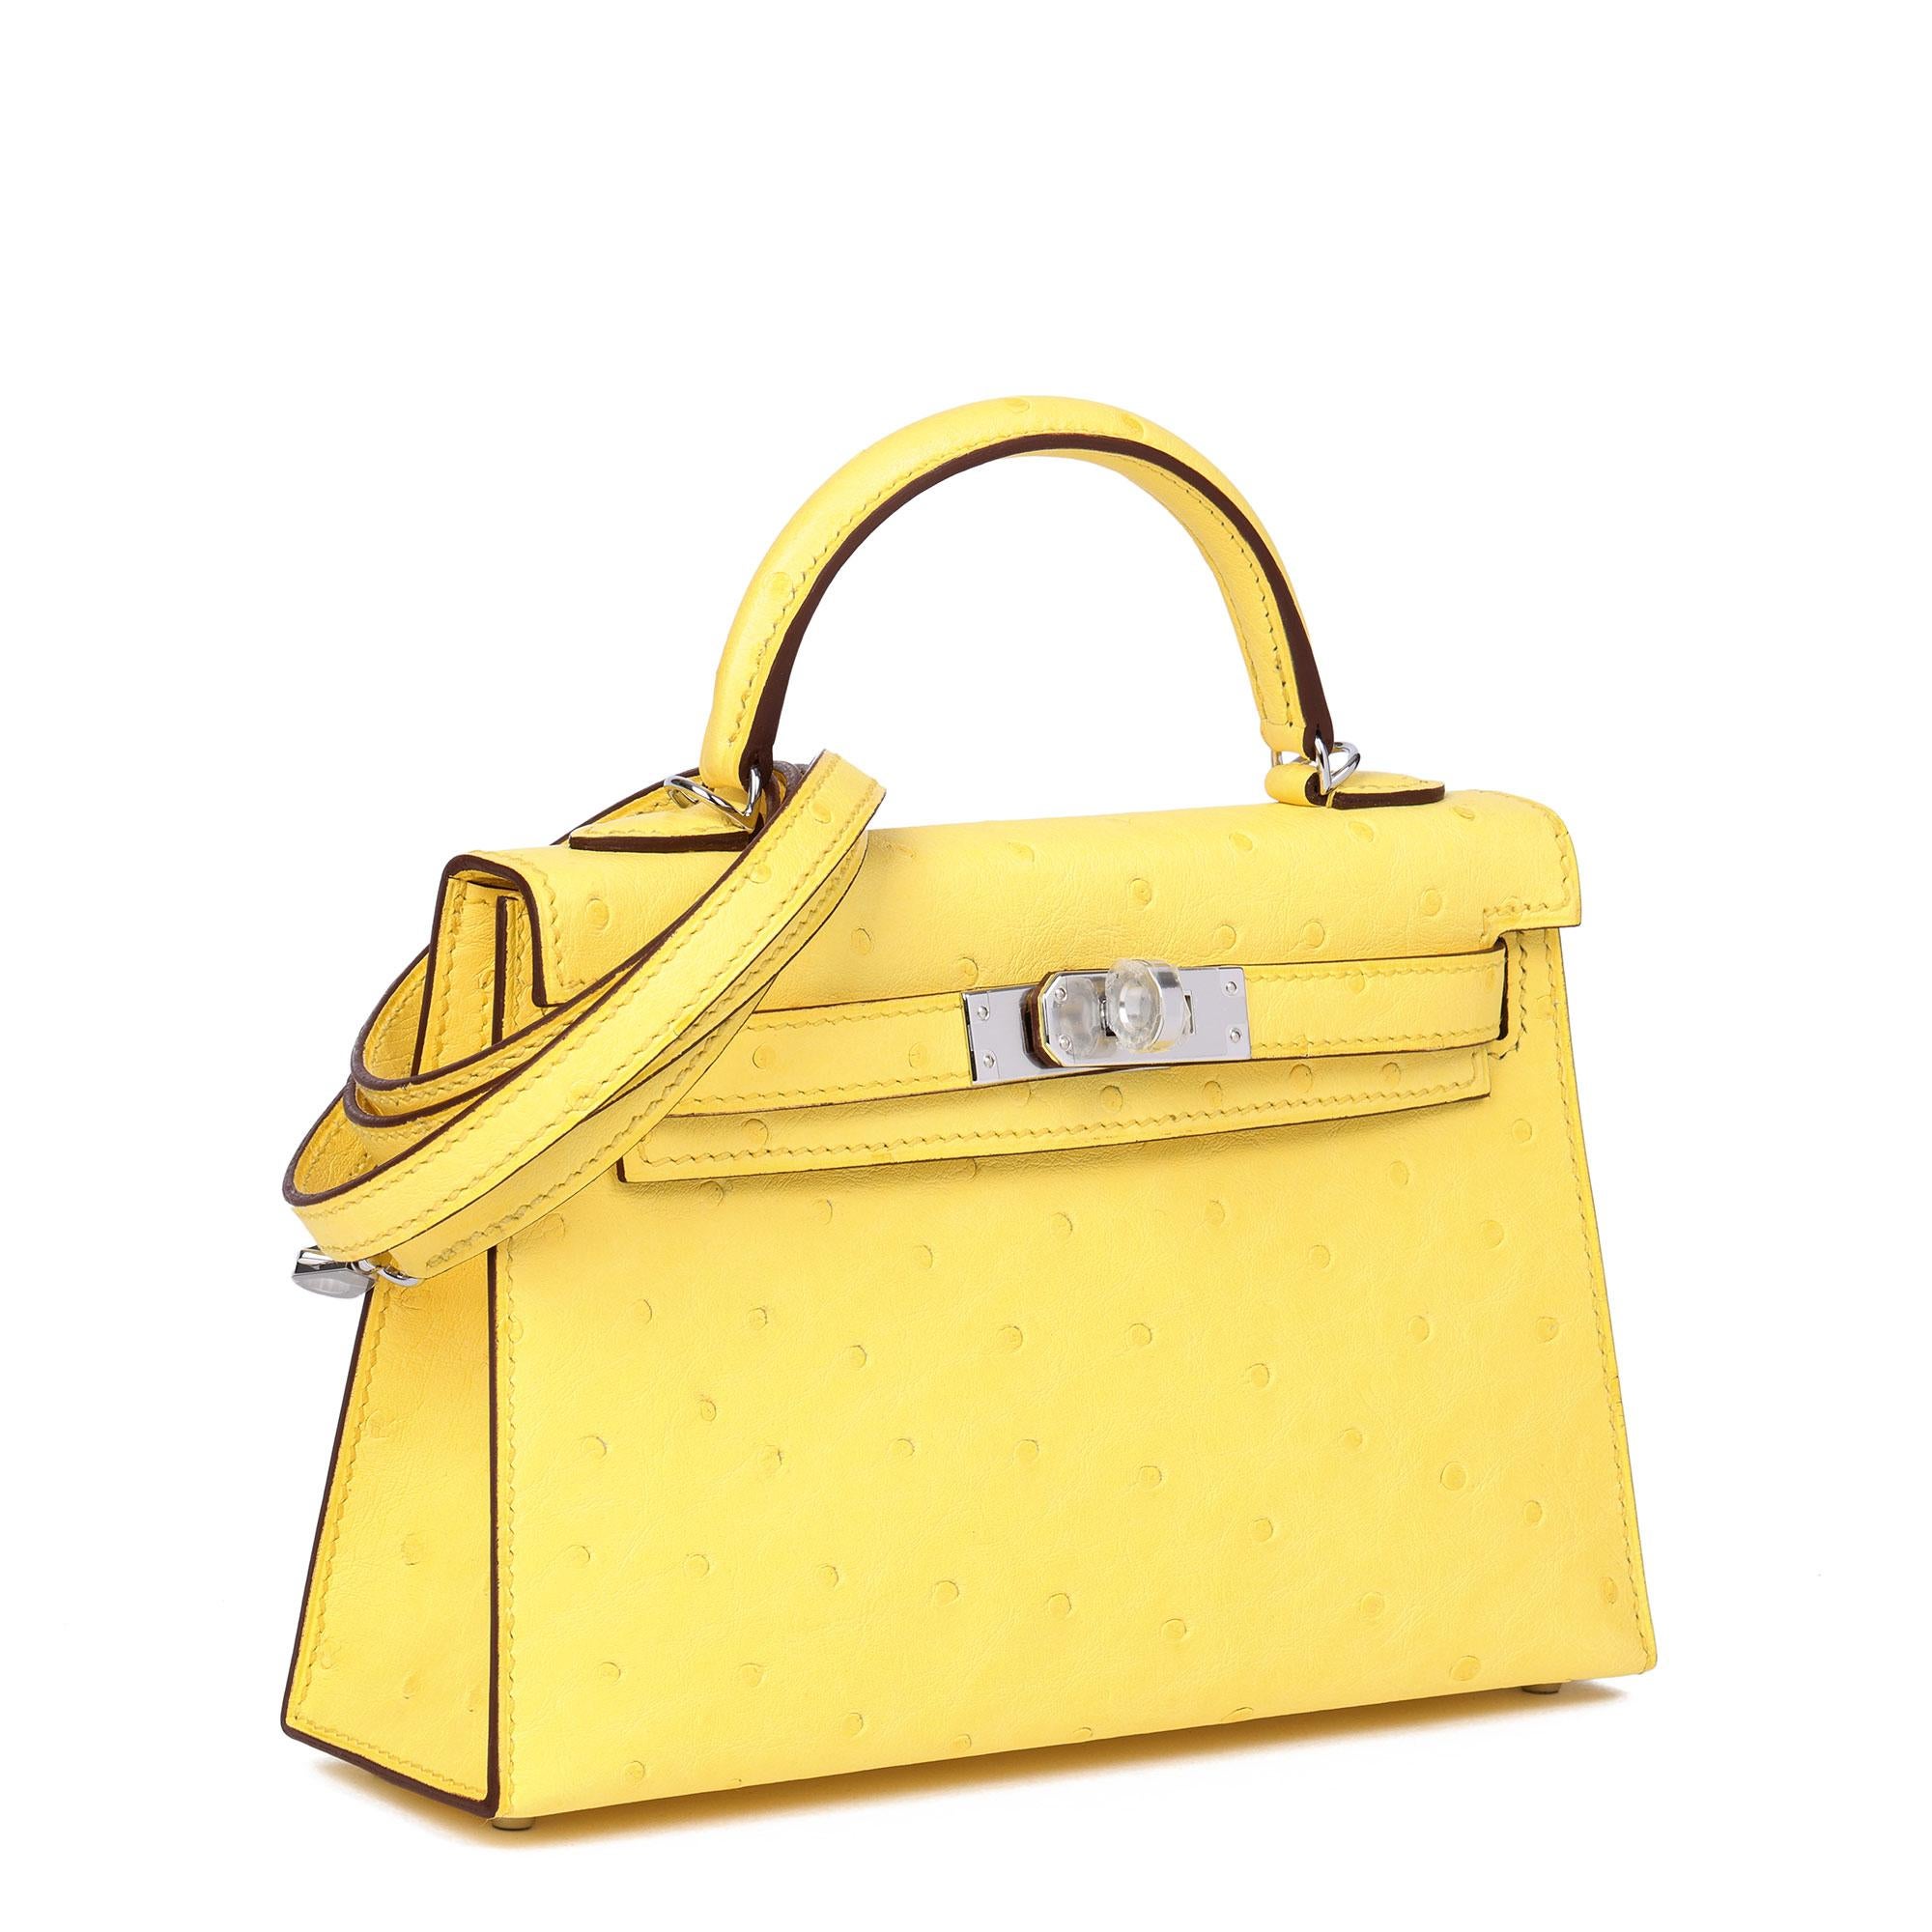 HERMÈS
Jaune Citron Ostrich Leather Kelly 20cm II Sellier

Serial Number: Z
Age (Circa): 2021
Accompanied By: Hermès Dust Bag, Box, Protective Felt, Care Booklet, Hermès Invoice
Authenticity Details: Date Stamp (Made in France)
Gender: Ladies
Type: